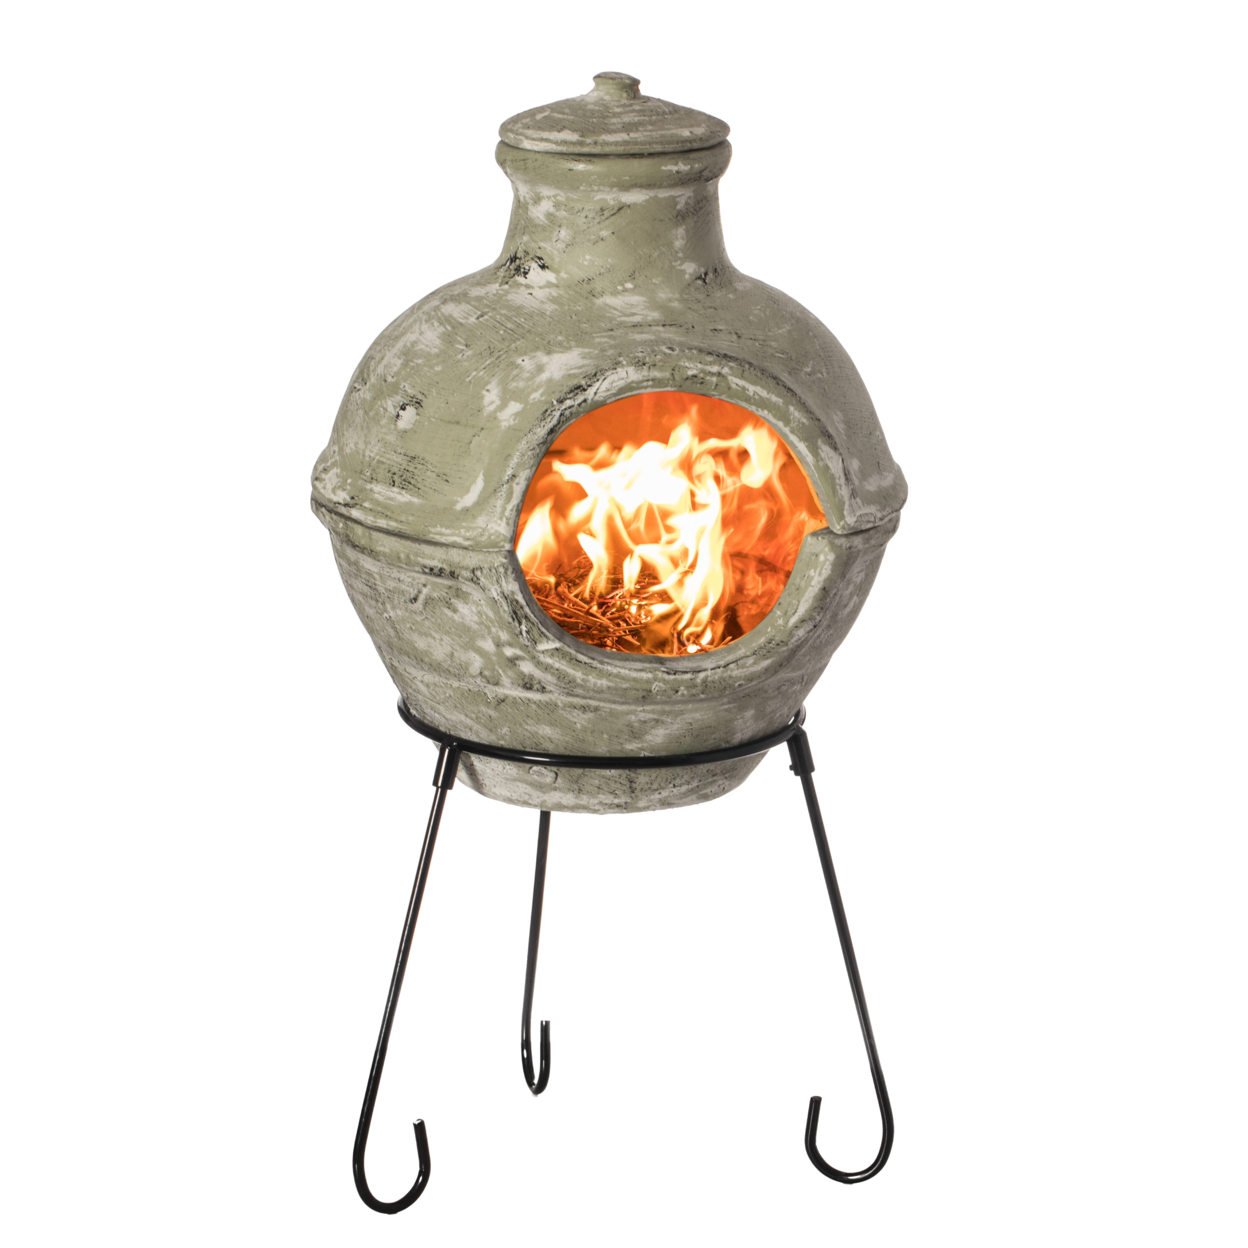 Beige Outdoor Clay Chiminea Barbecue Firepit Accent Design Charcoal Burning Fire Pit With Sturdy Metal Stand, Barbecue, Cocktail Party